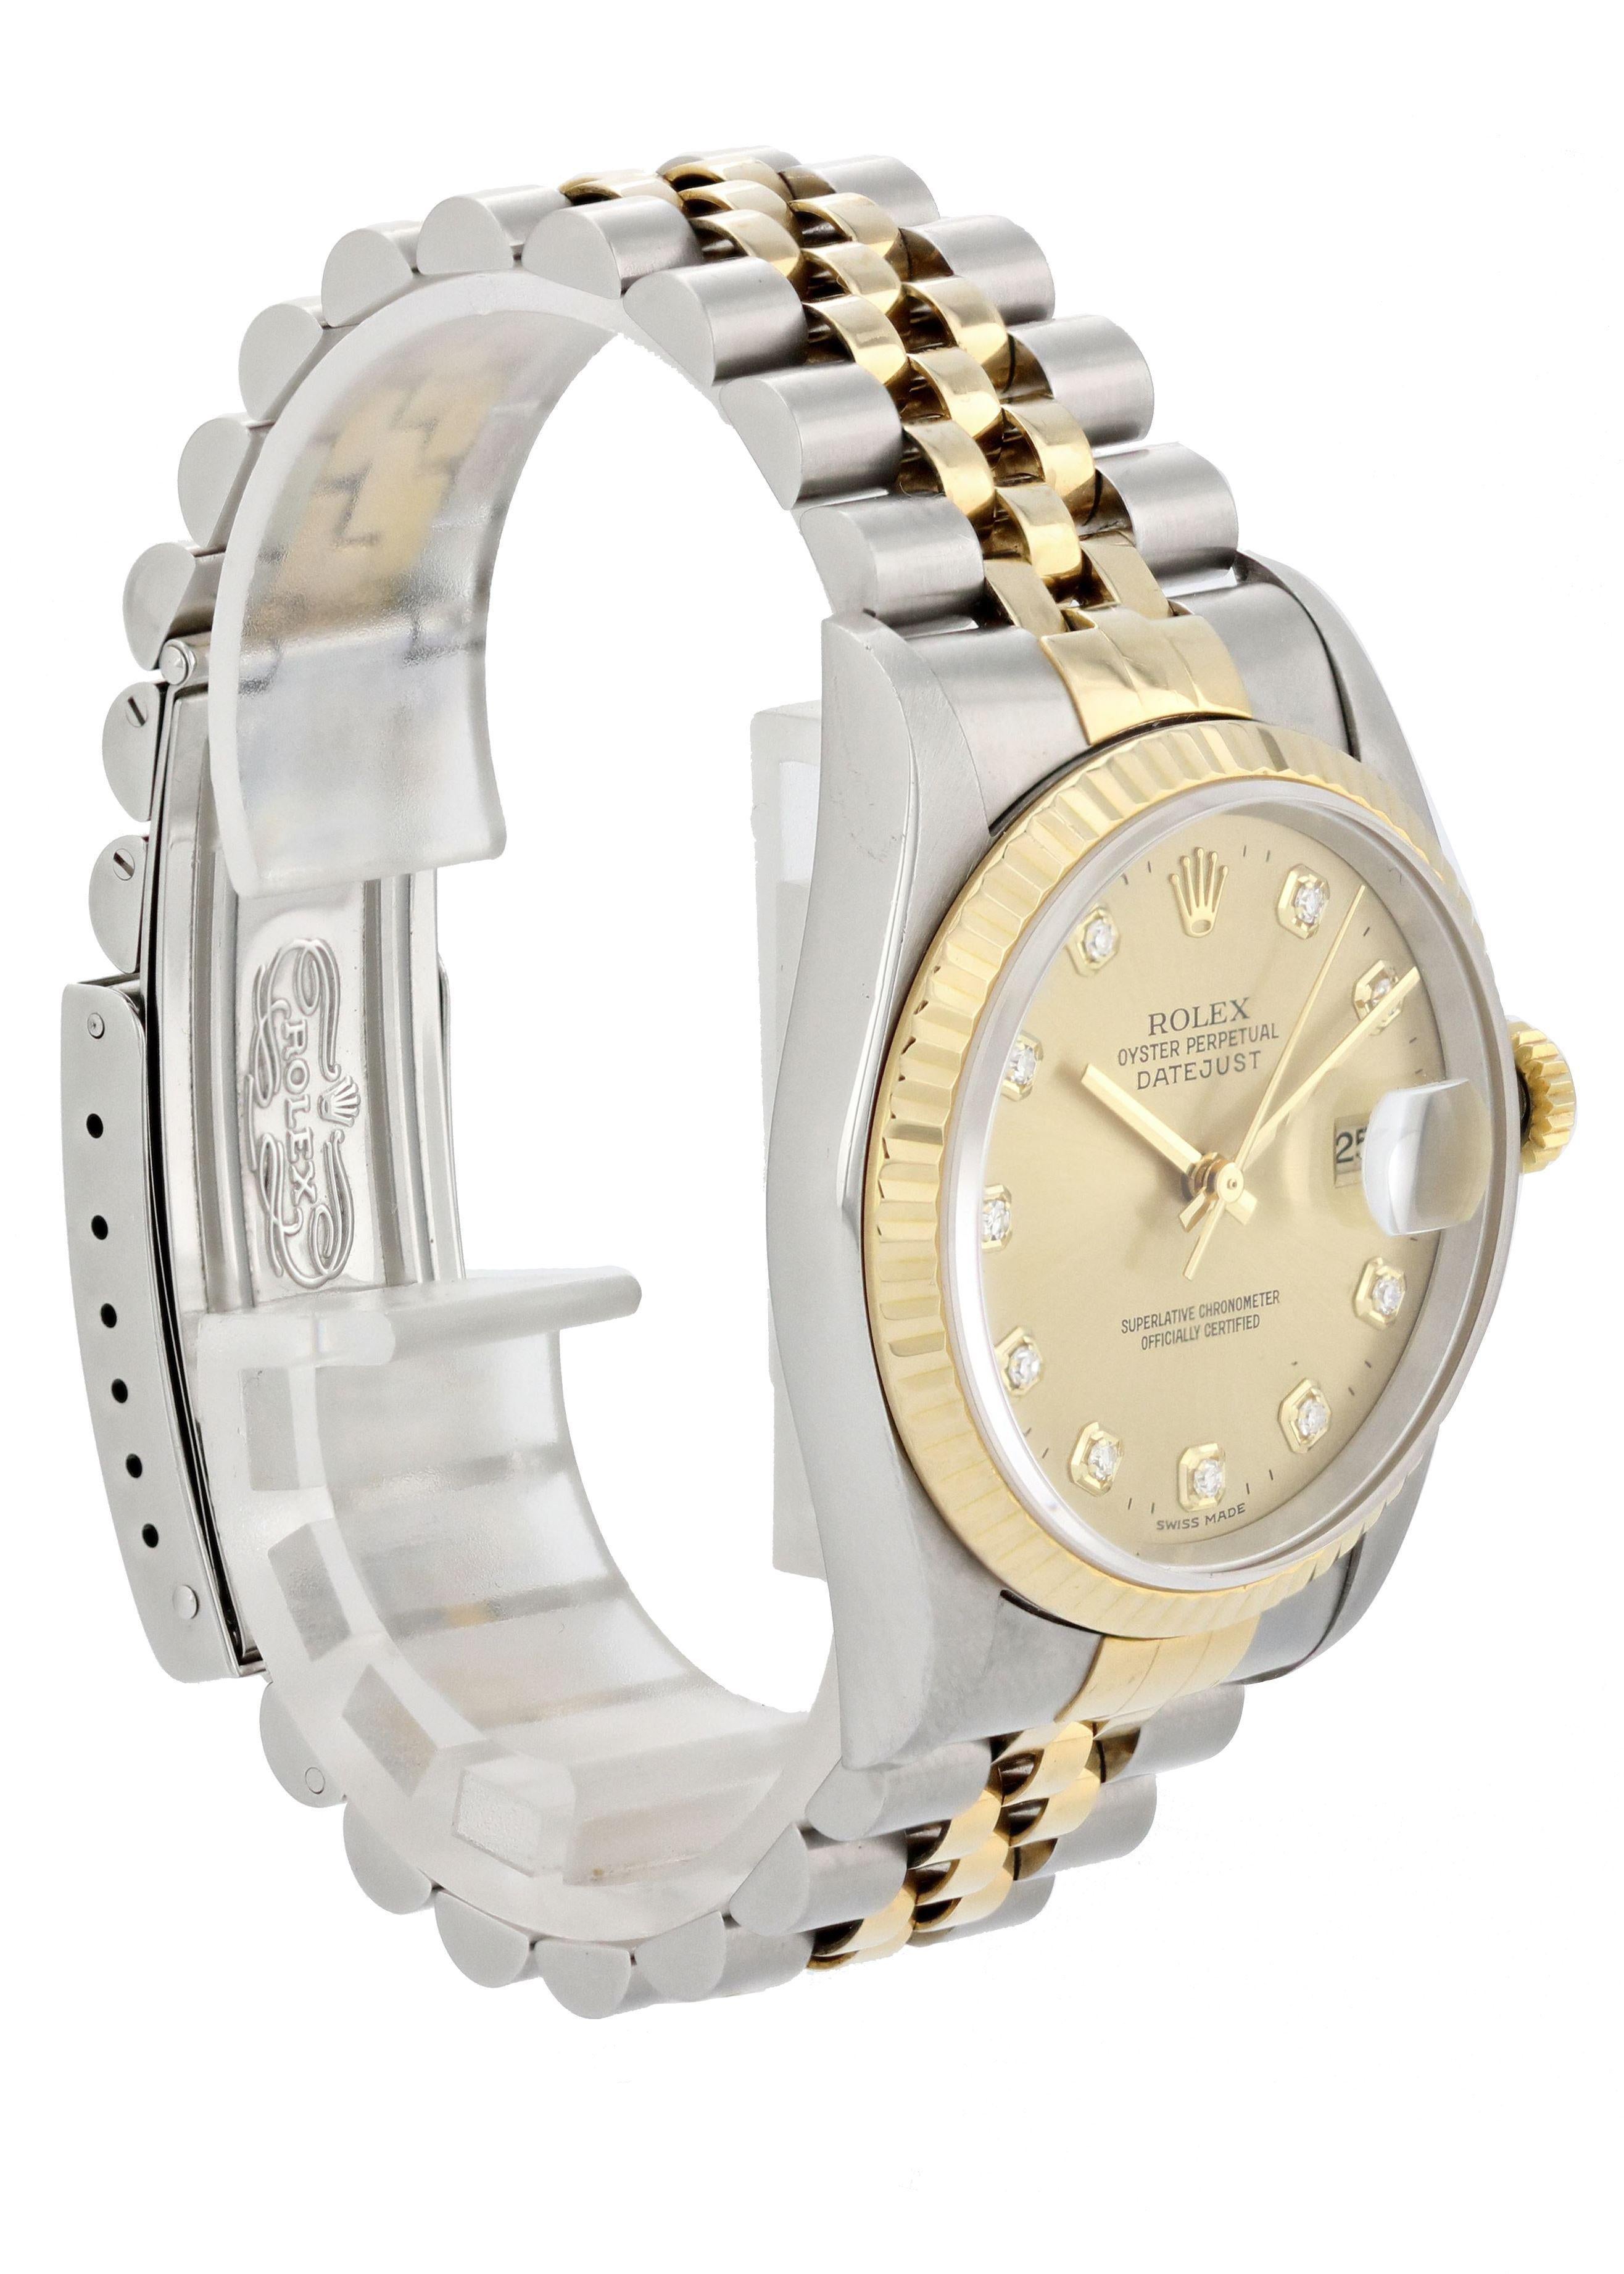 Rolex Datejust 16233 Diamond Dial Men's Watch In Excellent Condition For Sale In New York, NY